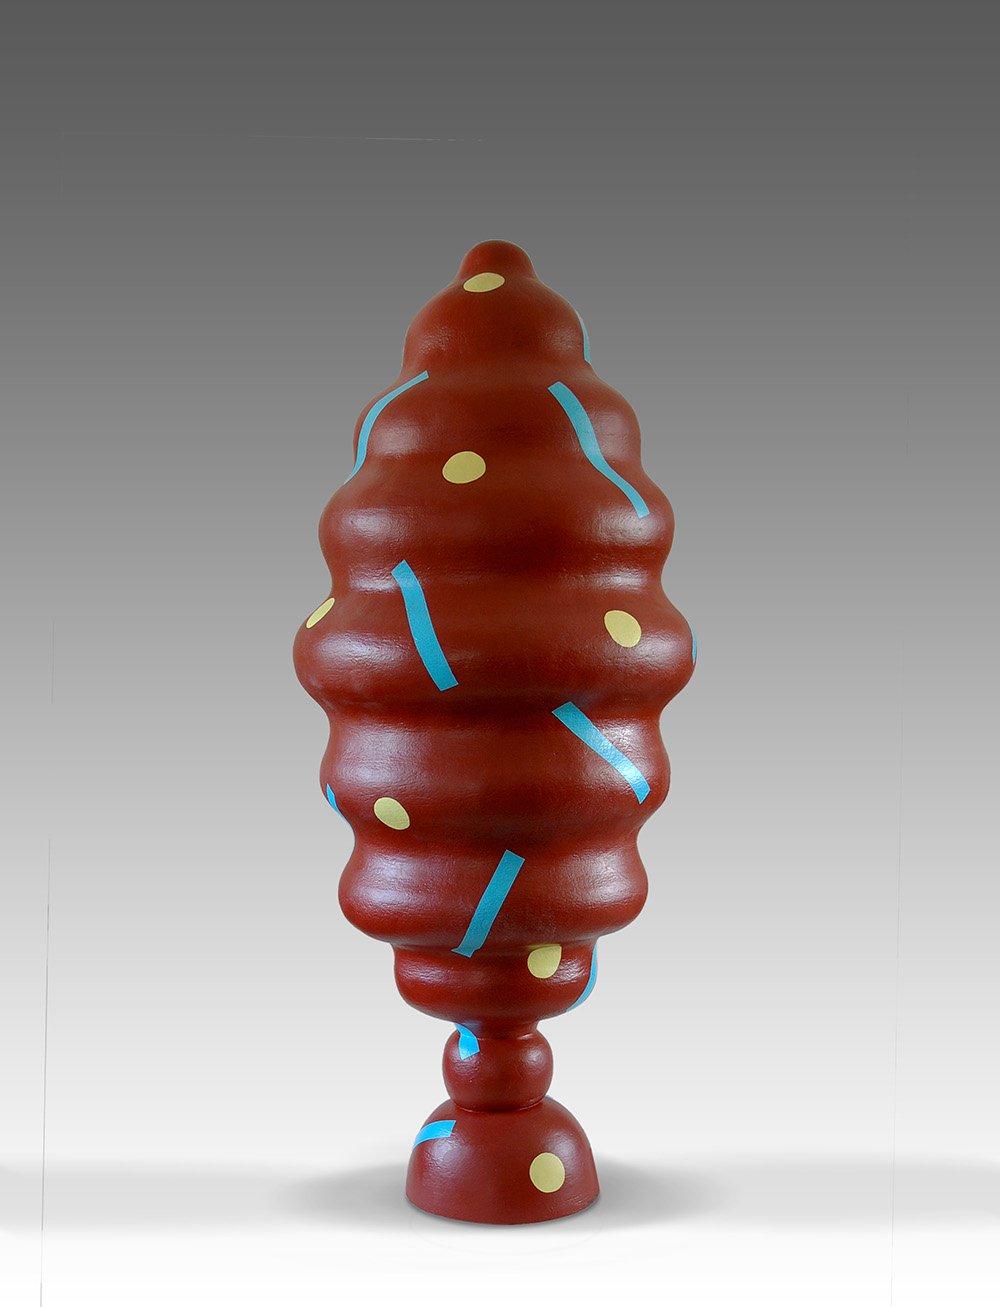 Rattle is a unique painted fired clay mounted on granite sculpture by contemporary artist Patricia Volk, dimensions are 93 × 36 × 36 cm
(36.6 × 14.2 × 14.2 in). 
The sculpture is signed and comes with a certificate of authenticity. 

Abstract